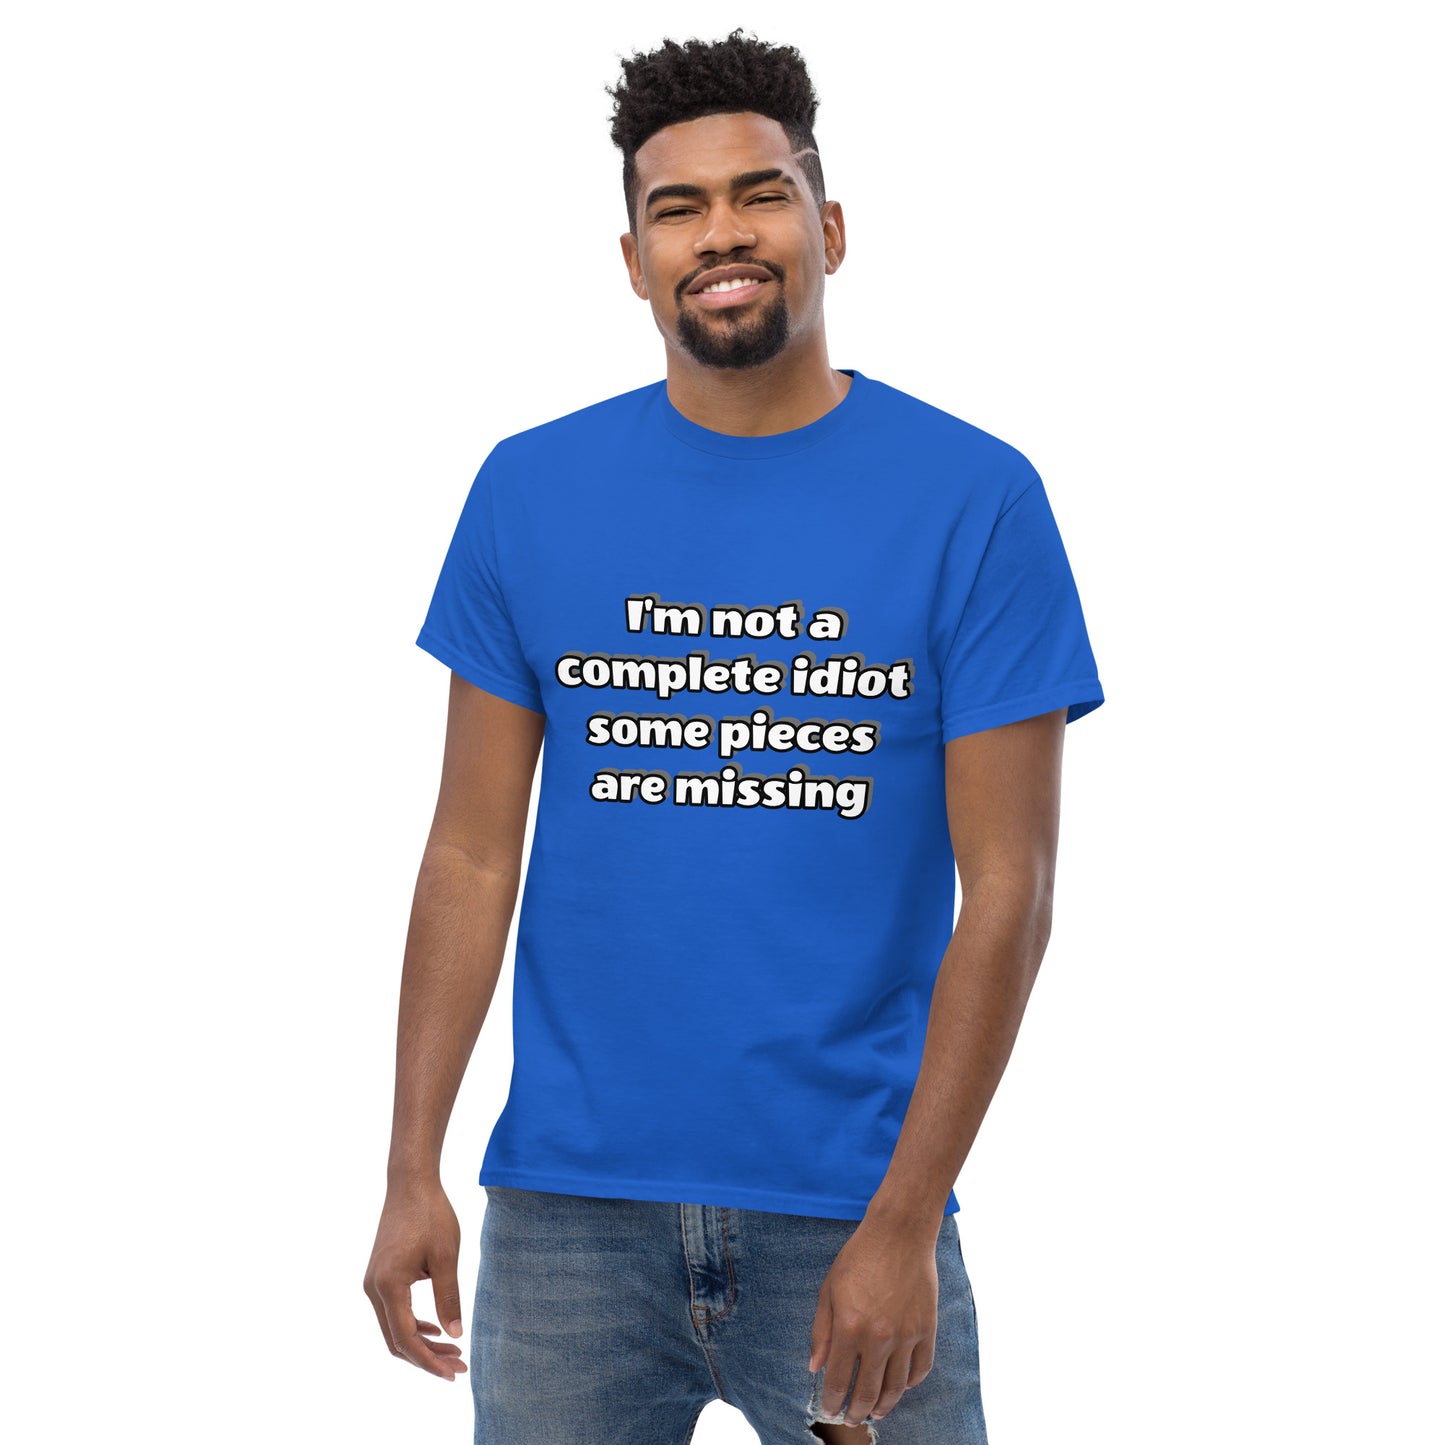 Men with royal blue t-shirt with text “I’m not a complete idiot, some pieces are missing”